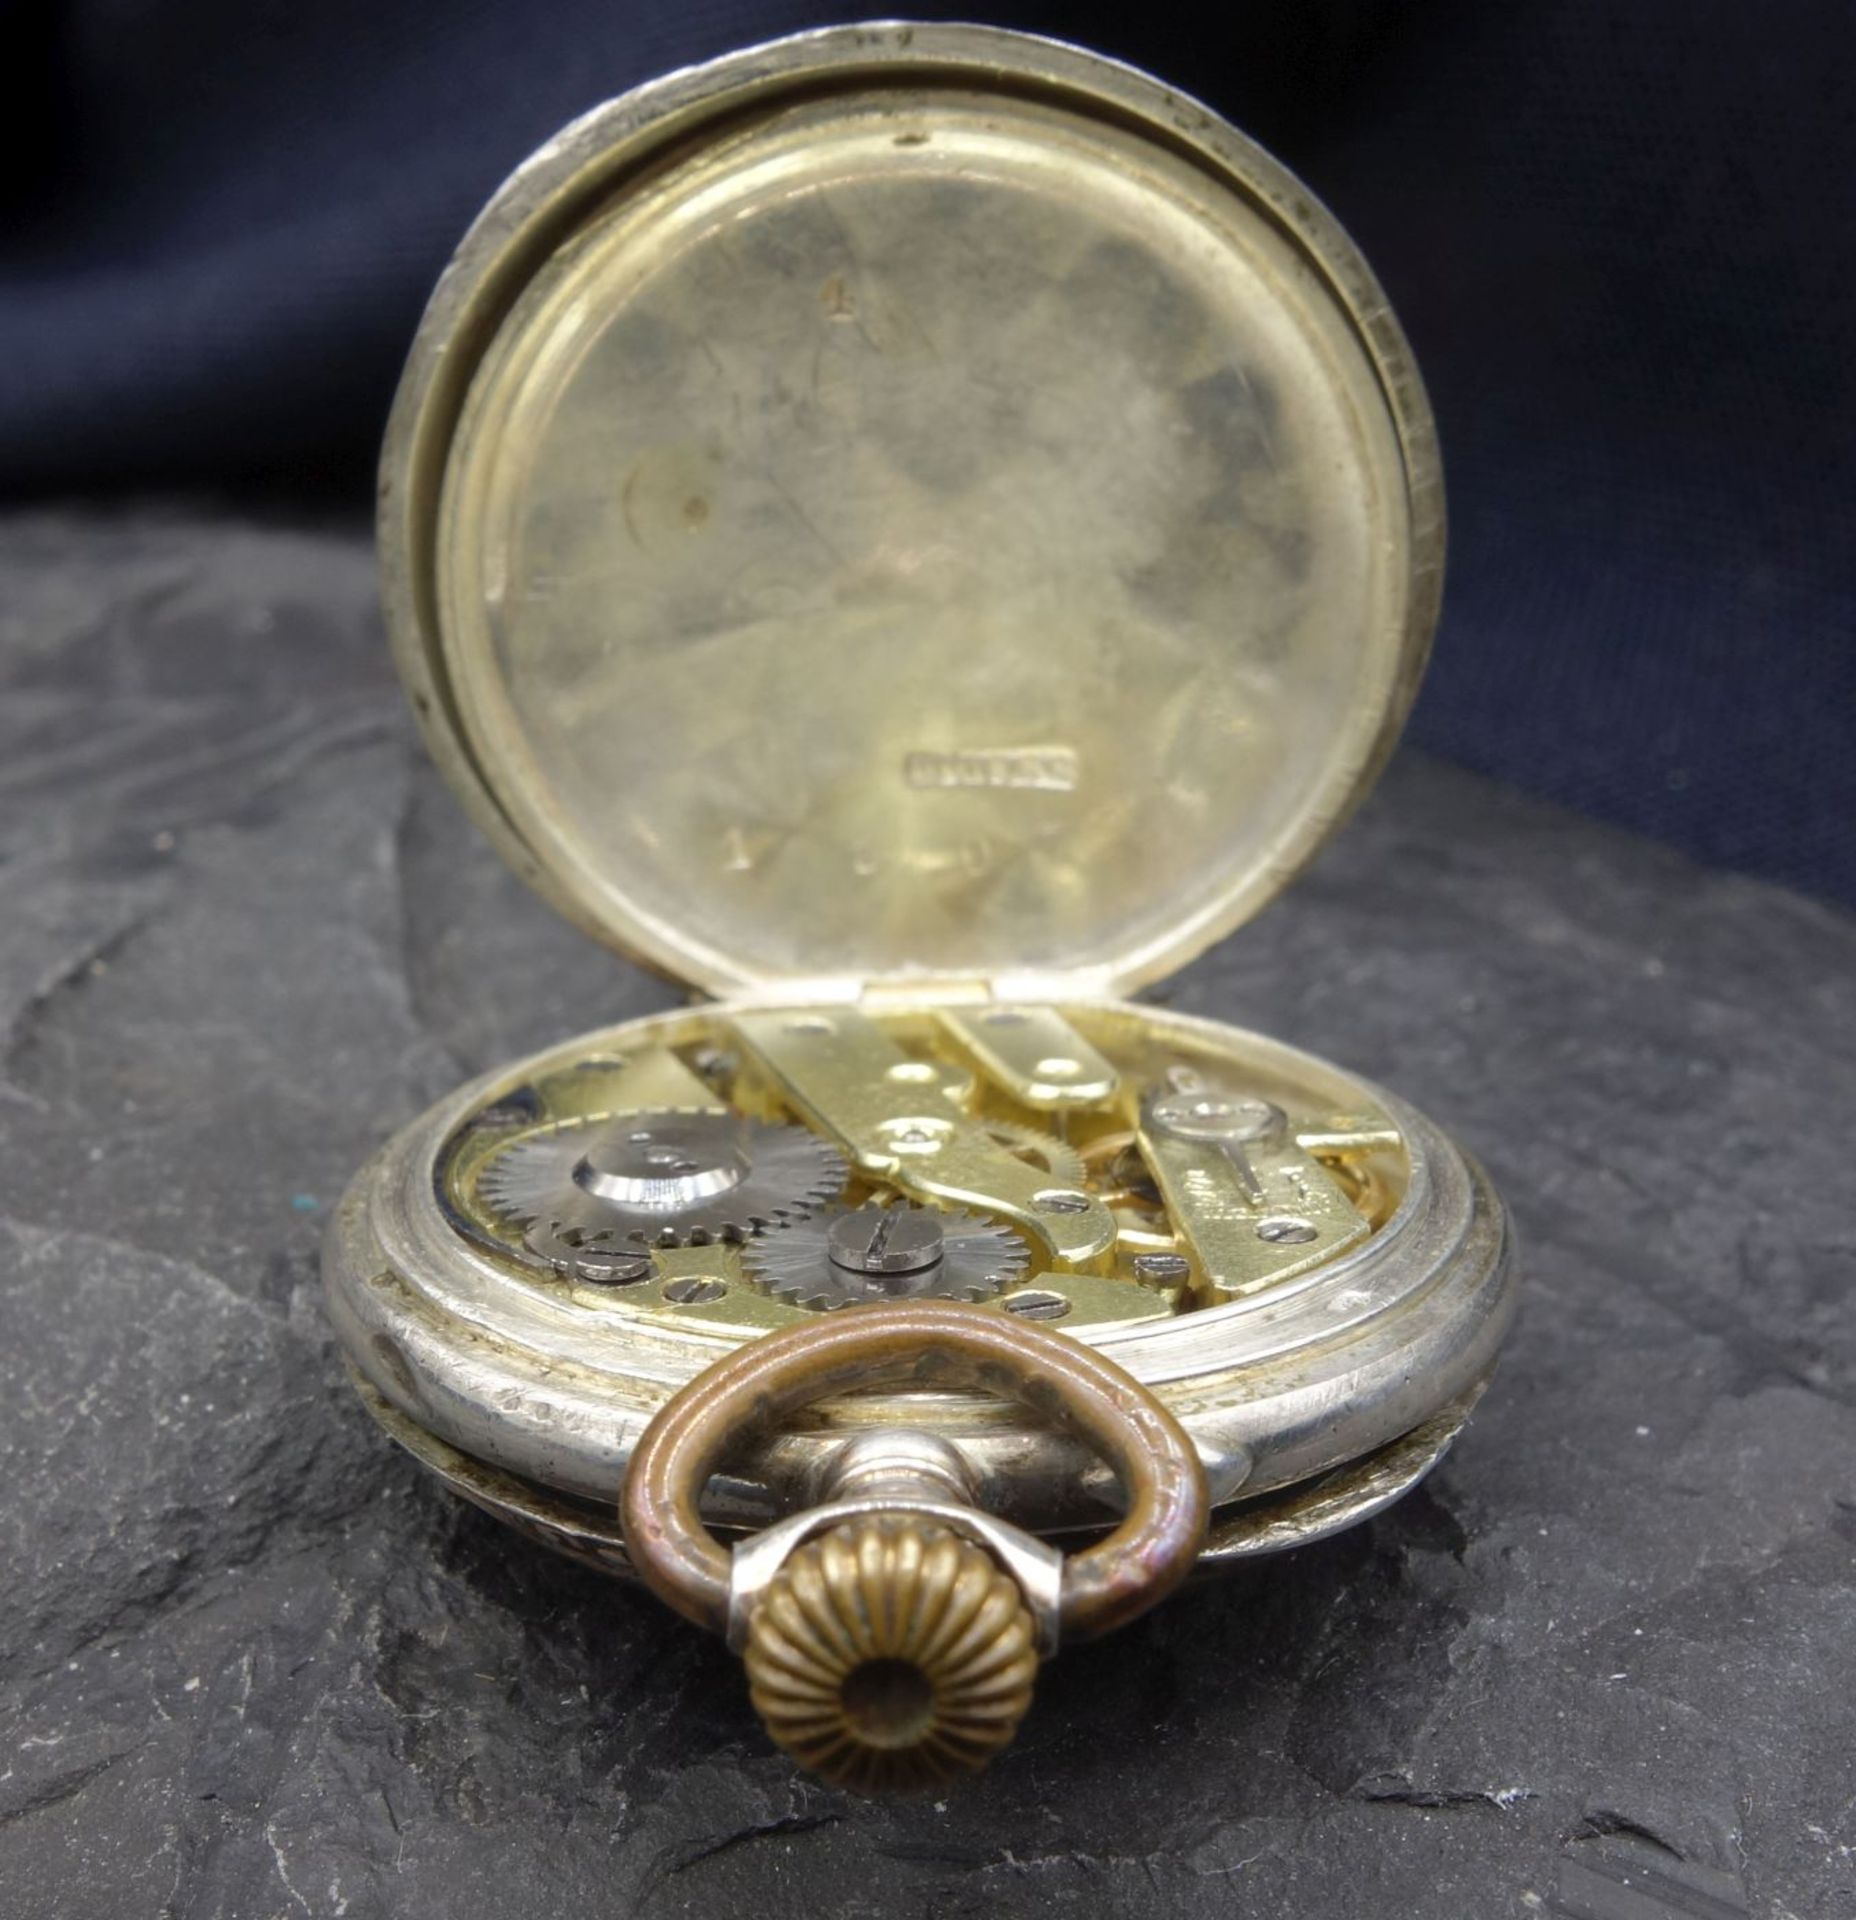 SMALL LADIES' POCKET WATCH IN GALONNÉ CASE / GALLONÉ POCKET WATCH - Image 4 of 5